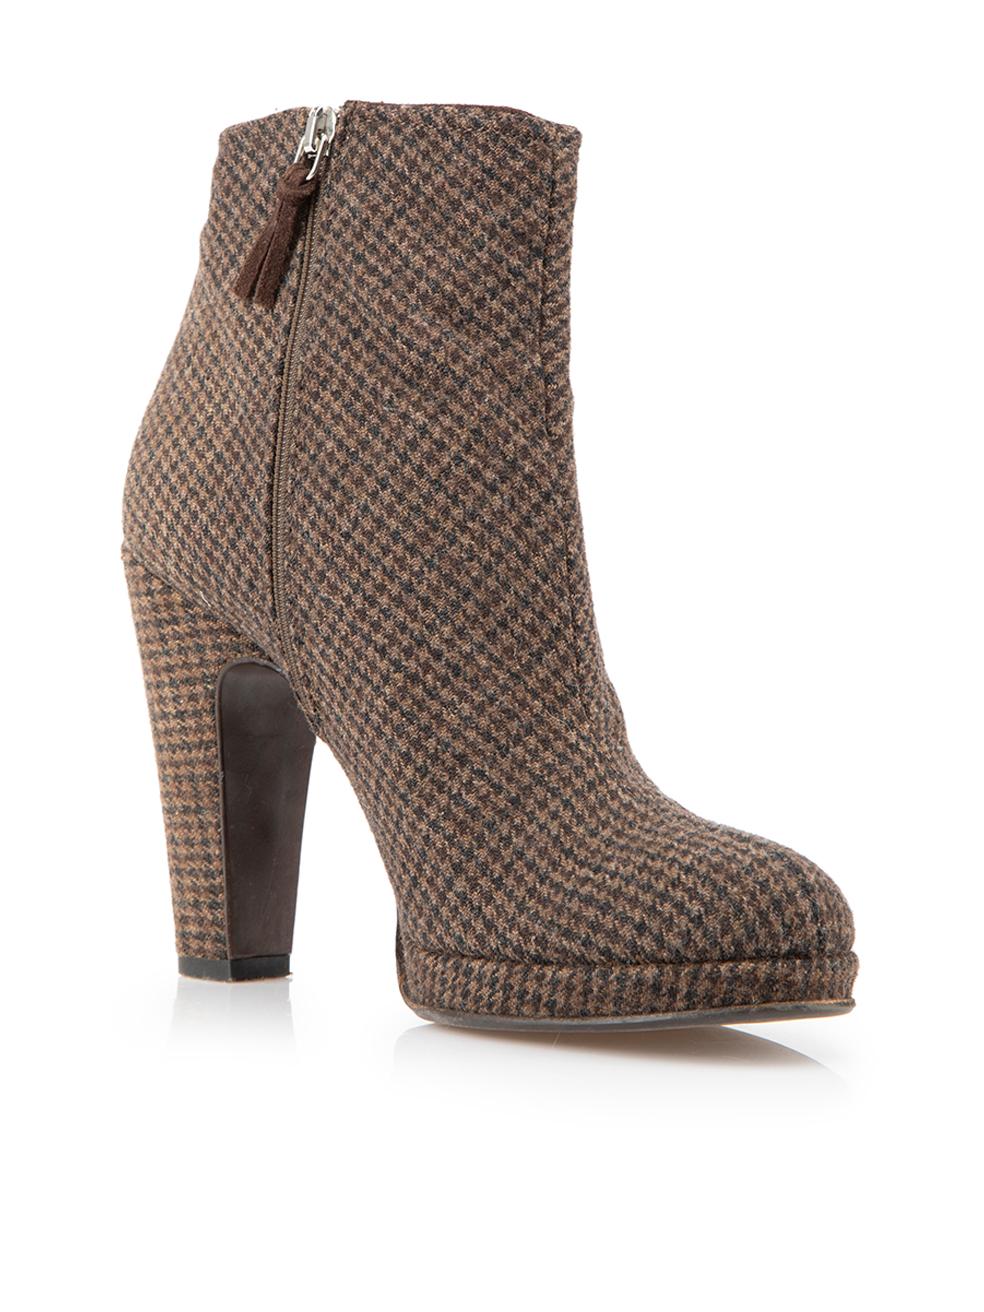 CONDITION is Very good. Minimal wear to boots is evident. Minimal wear to the heel tip and exterior tweed fabric on this used Miu Miu designer resale item. 



Details


Brown

Tweed

Ankle boots

Houndstooth pattern

Round toe

High block